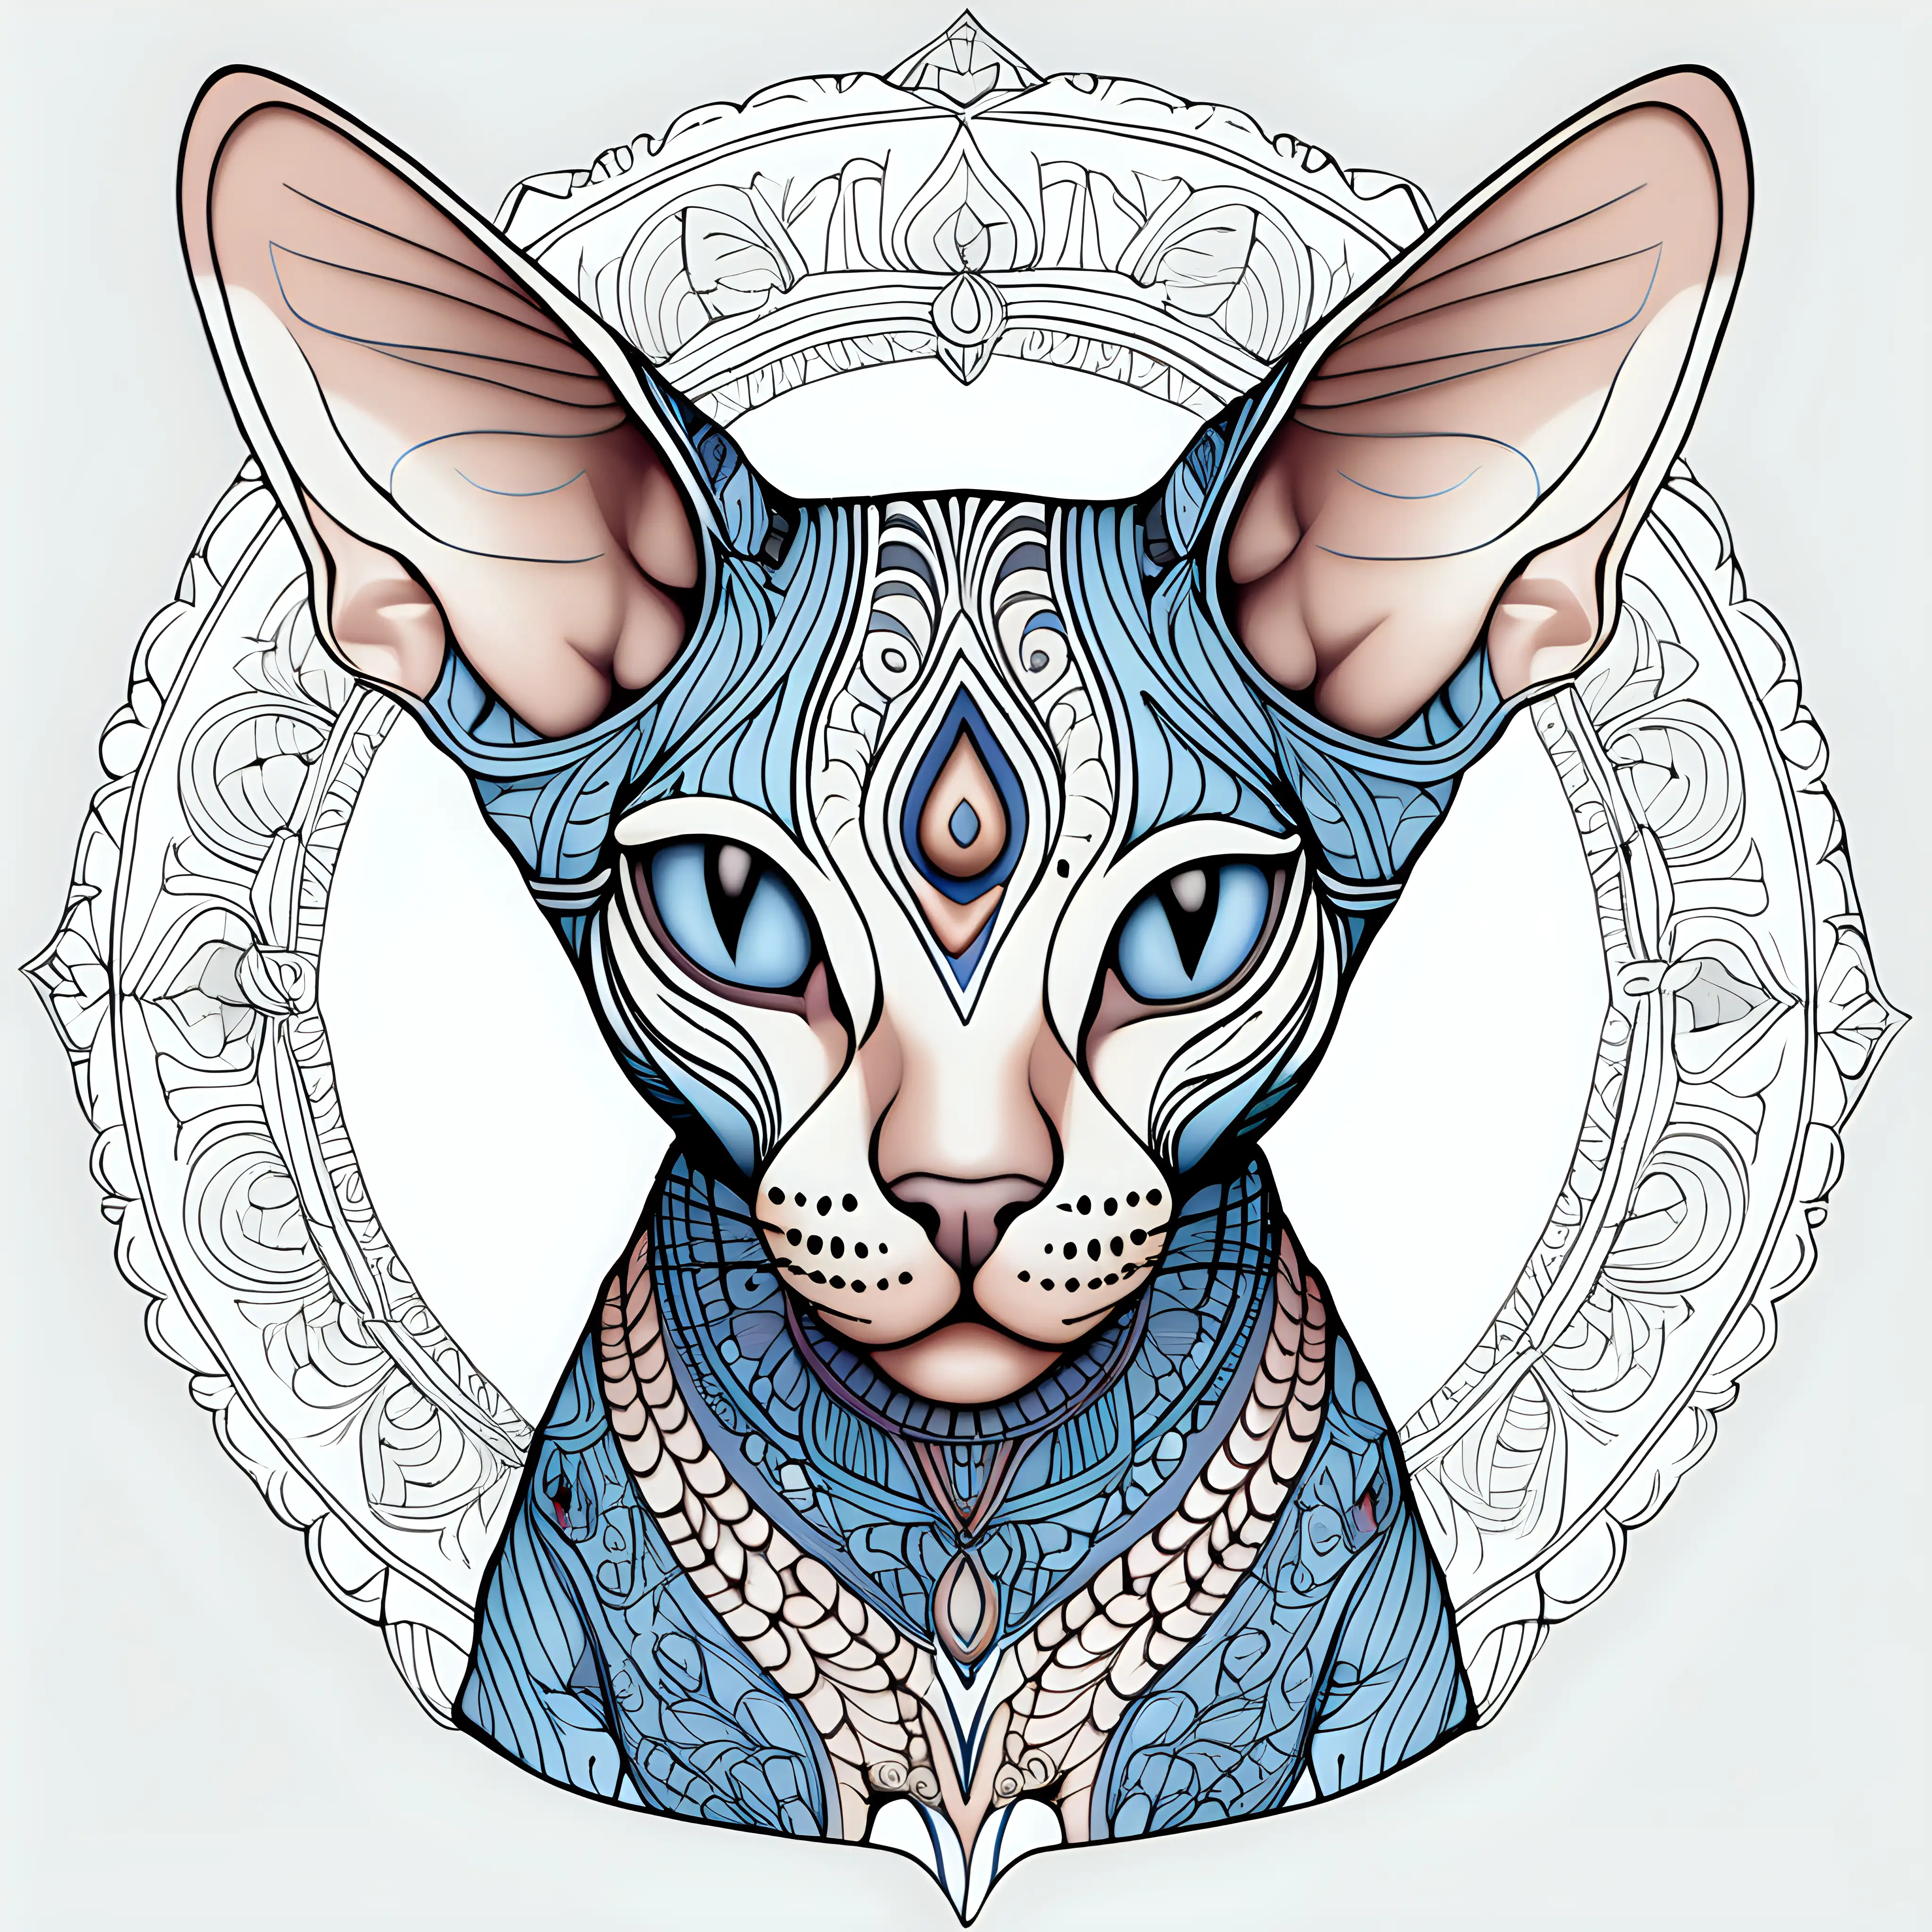 Sphynx Cat Mandala Intricate Vector Artwork in HD with Simple Colored Details on White Background